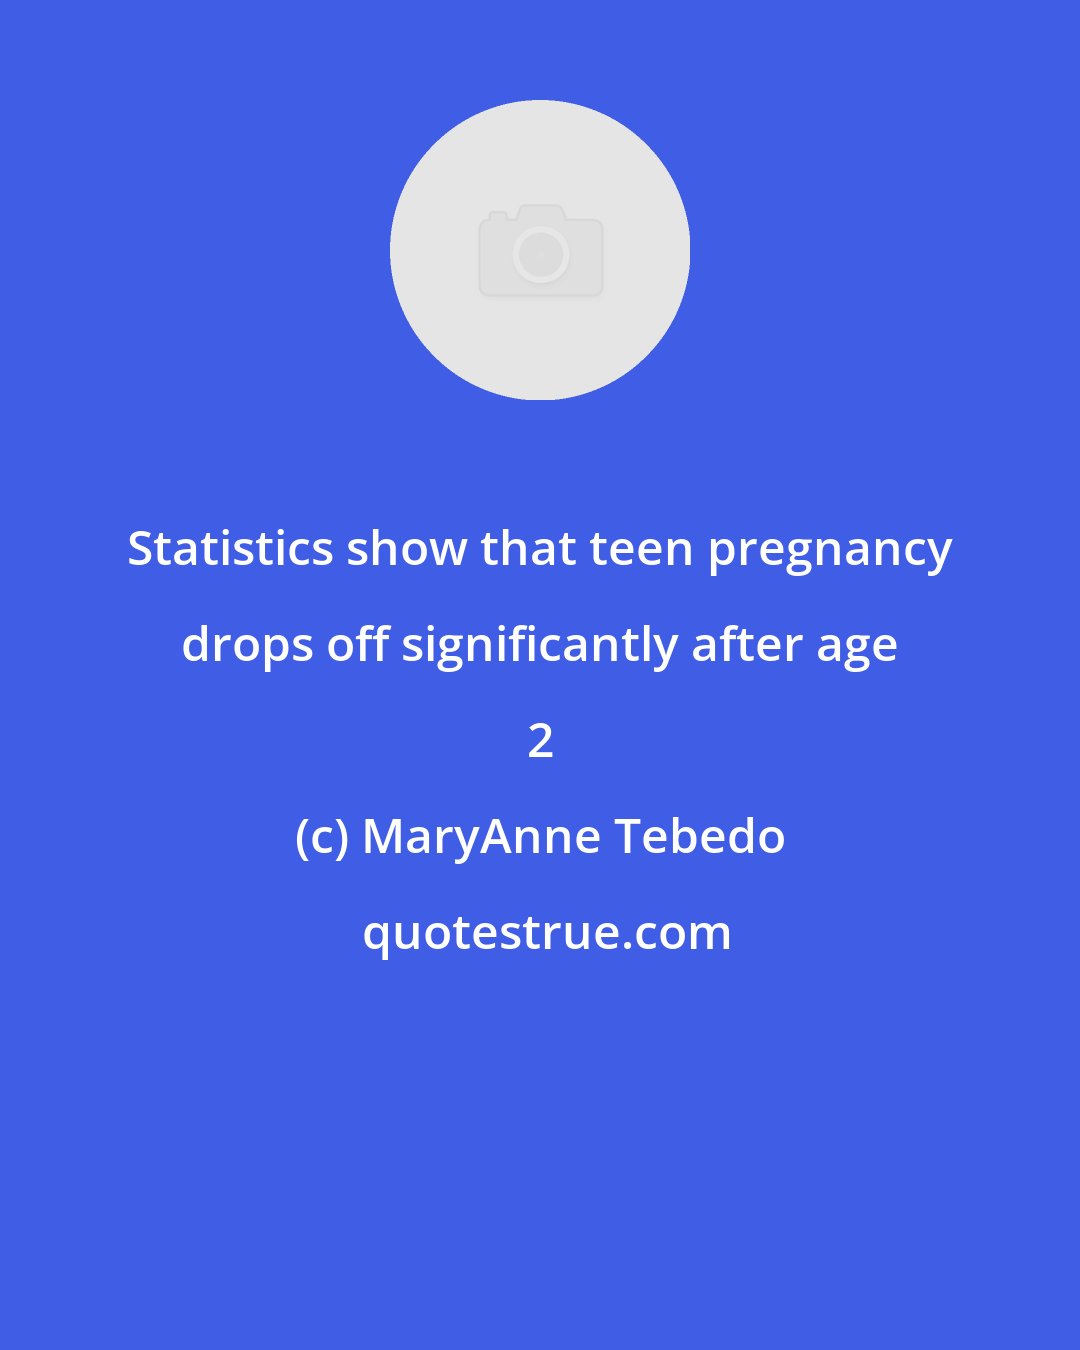 MaryAnne Tebedo: Statistics show that teen pregnancy drops off significantly after age 2